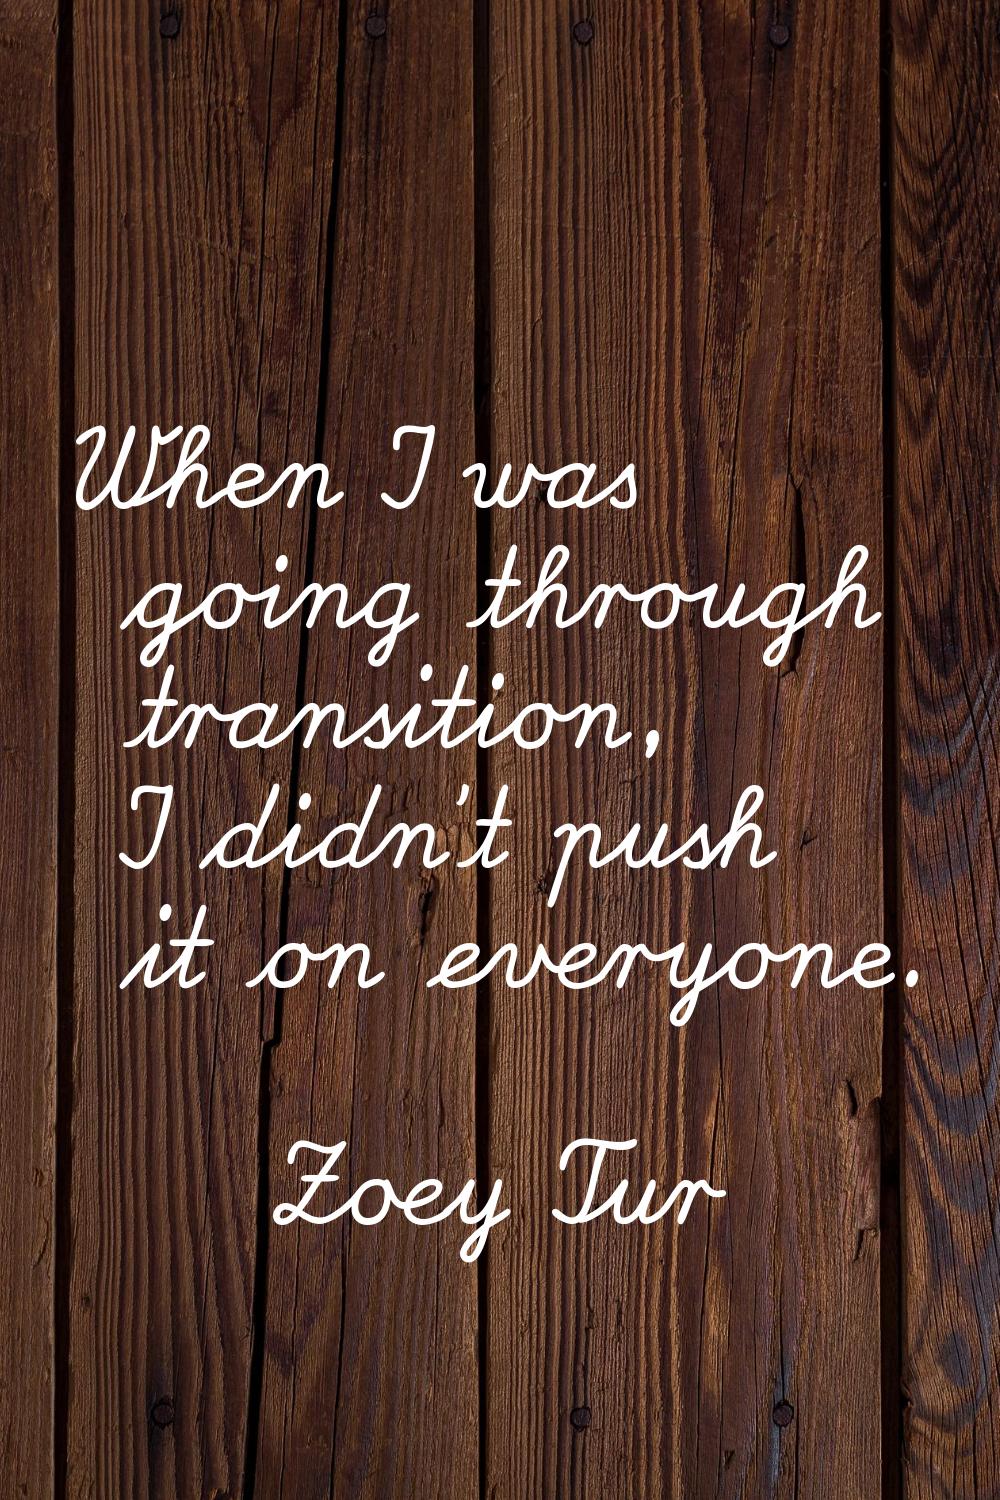 When I was going through transition, I didn't push it on everyone.